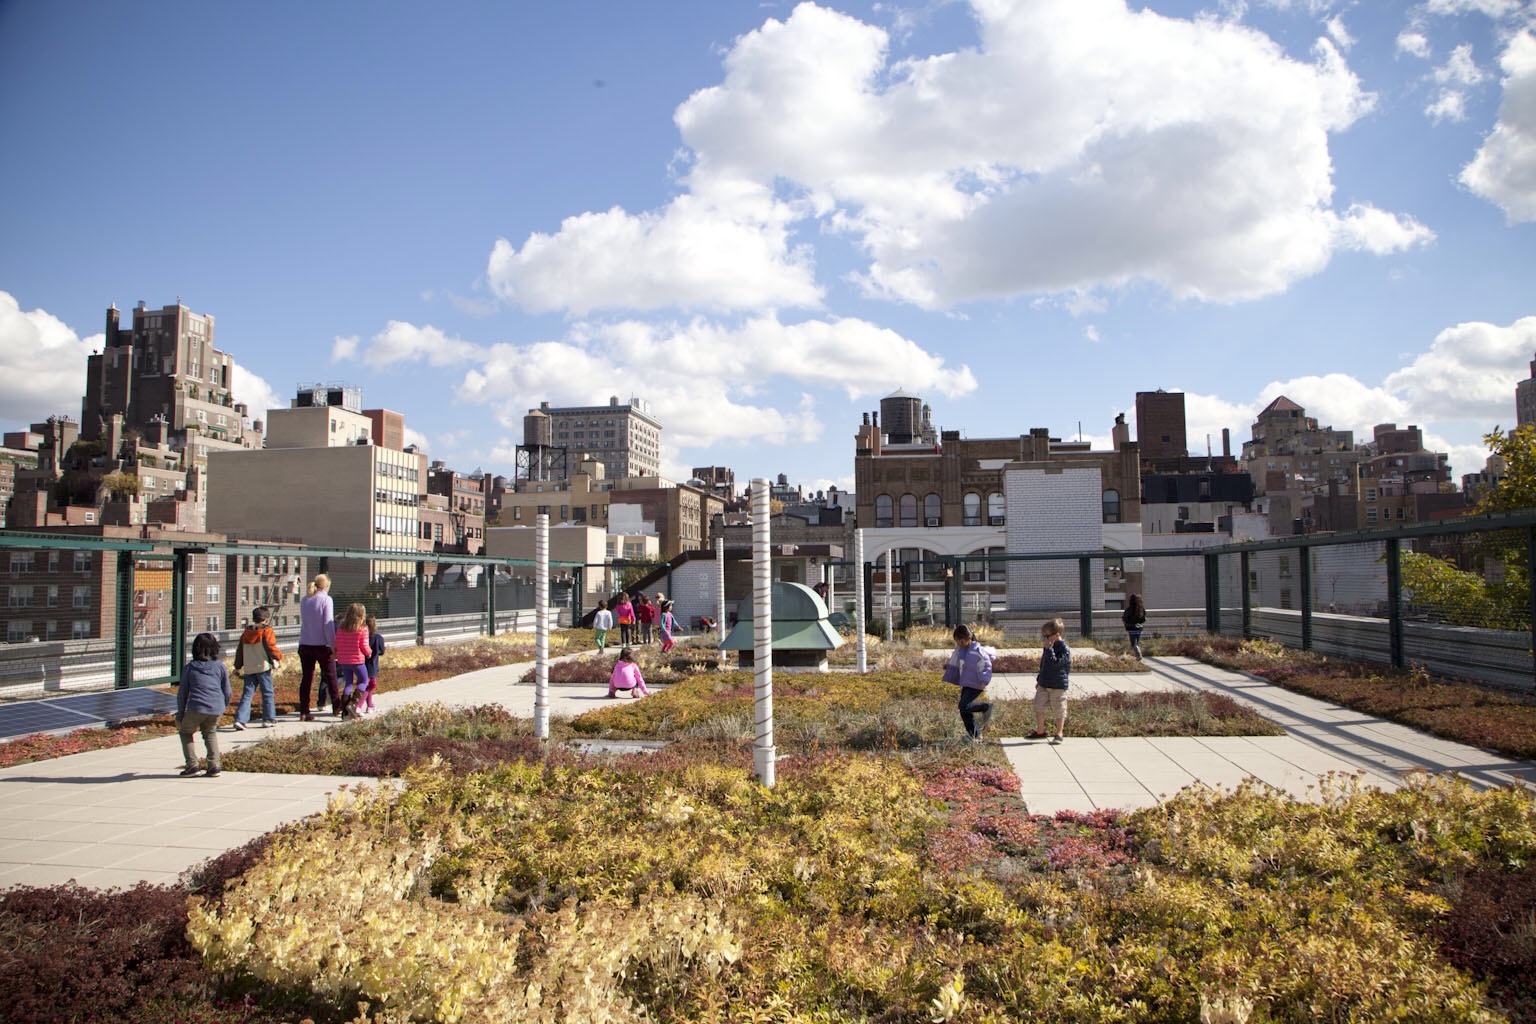 The green roof at P.S. 41; click to enlarge. (Photo: Jessica Bruah)